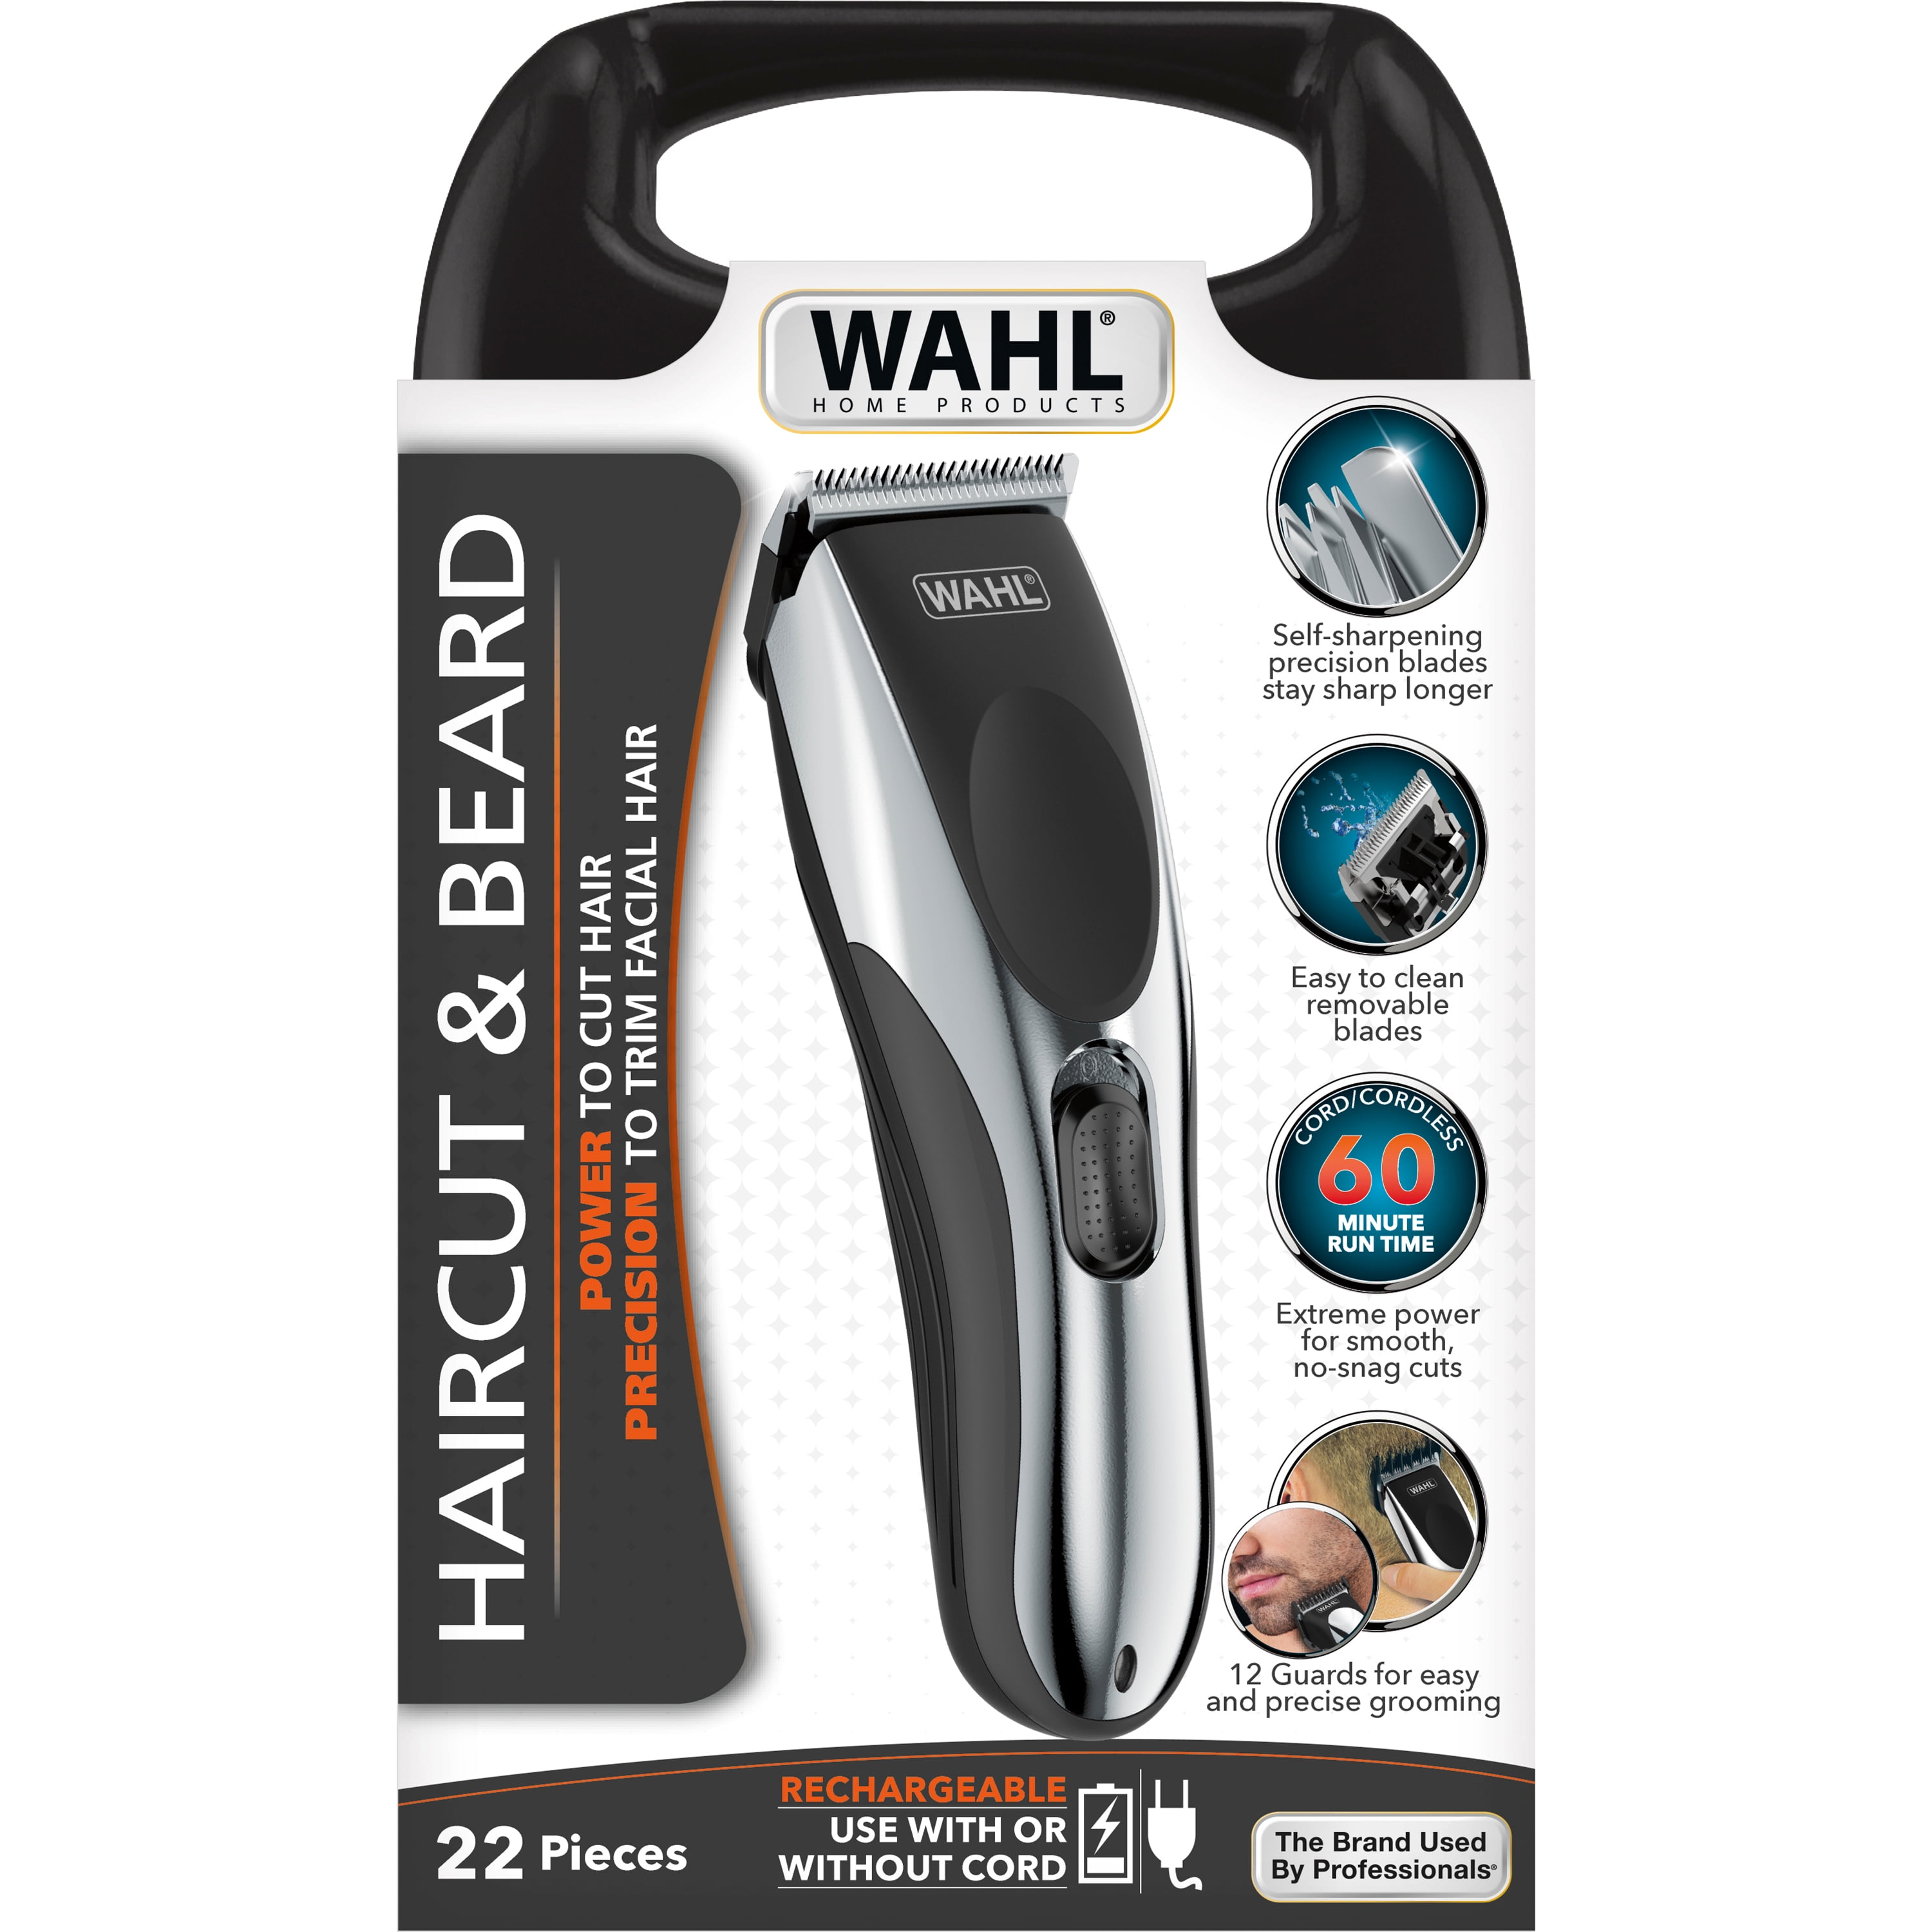 wahl home products haircut and beard